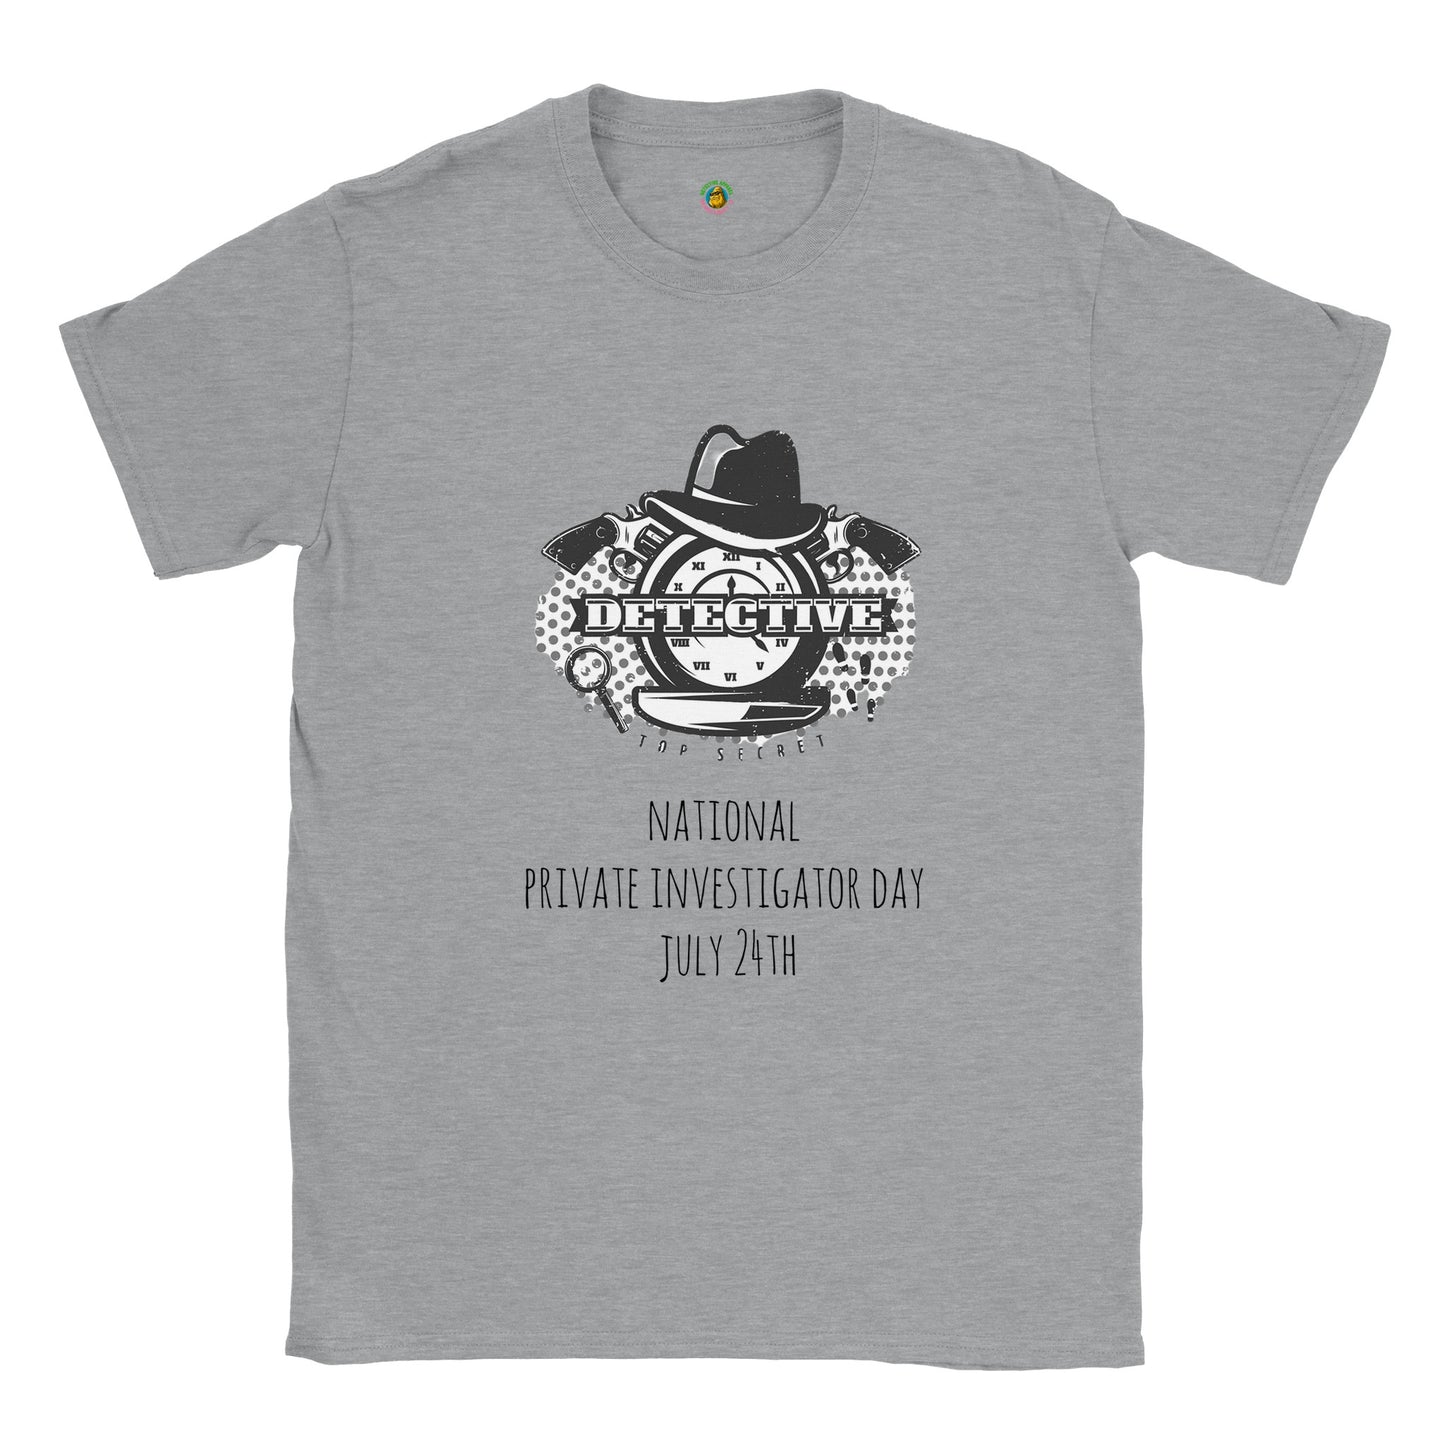 Short-Sleeve Unisex Crewneck T-shirt - National Private Investigator Day July 24th